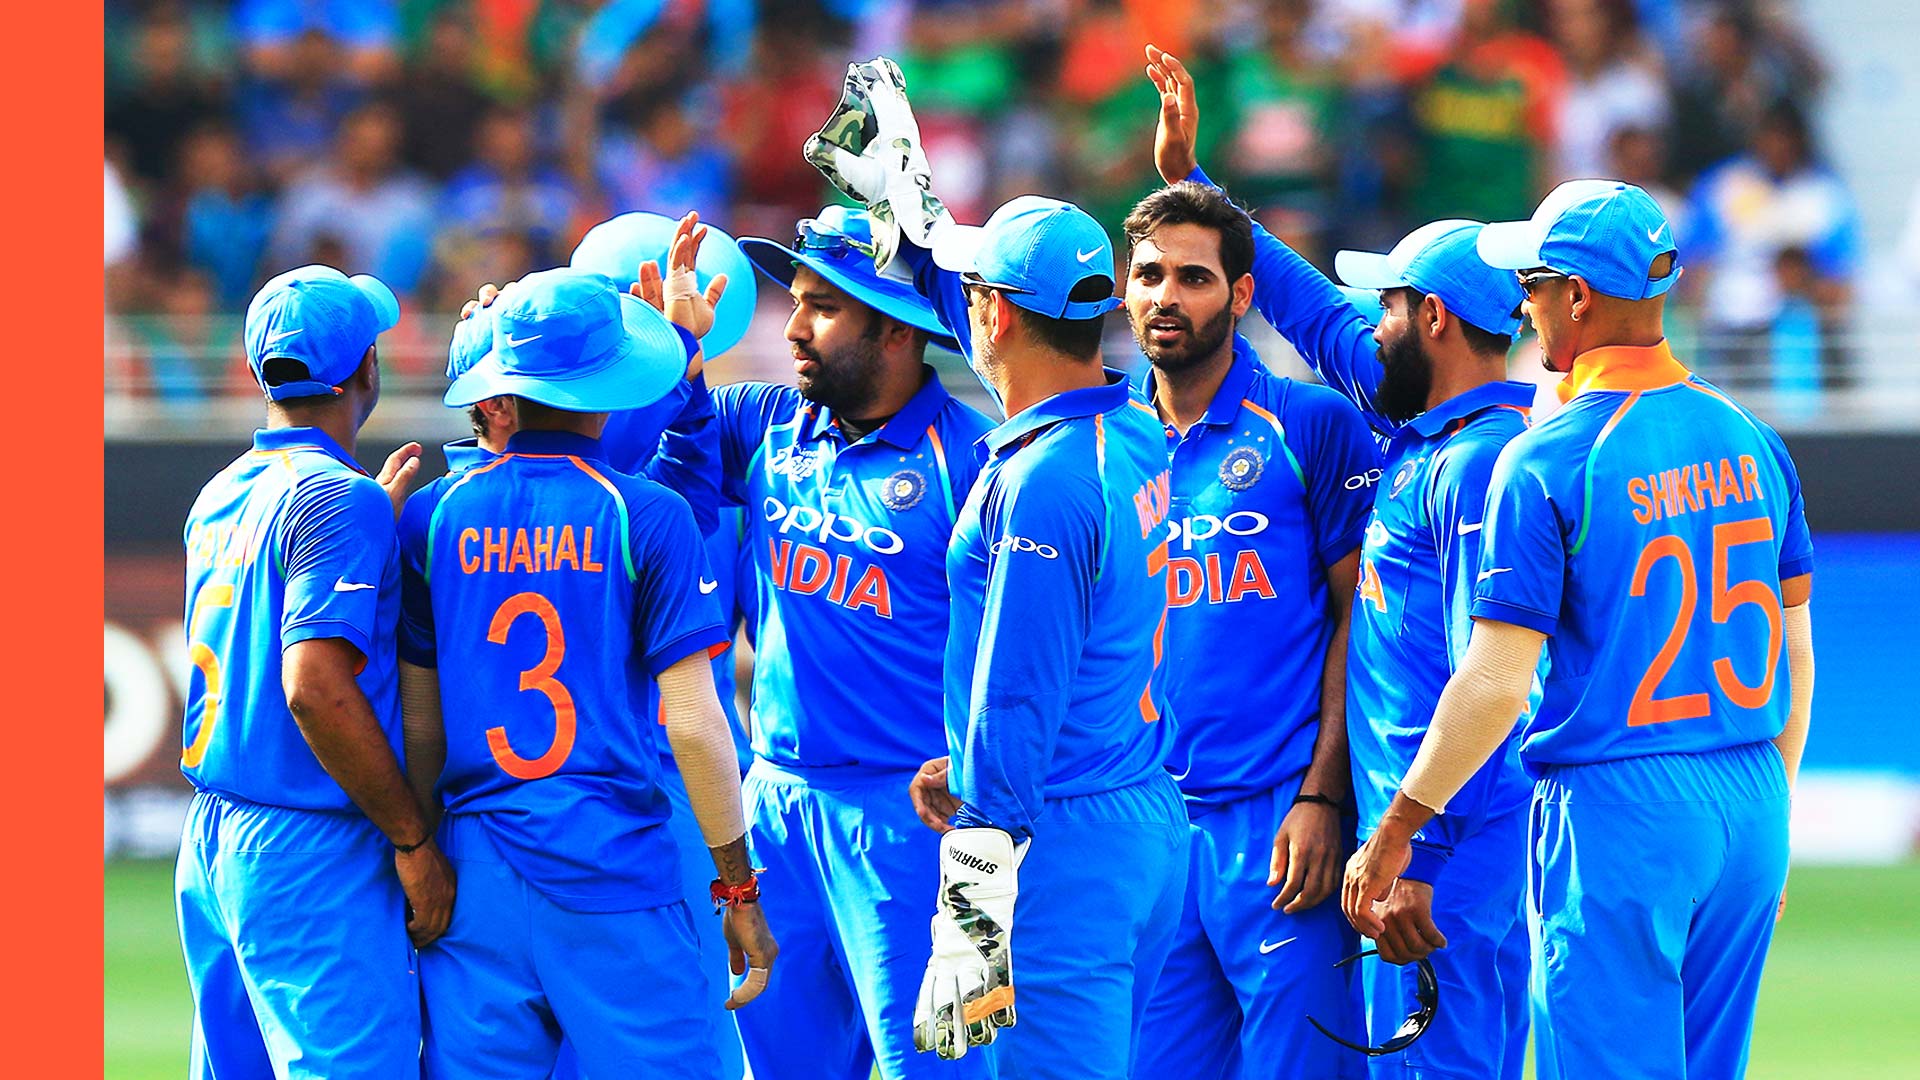 image of all indian cricket players. List of India ODI cricketers